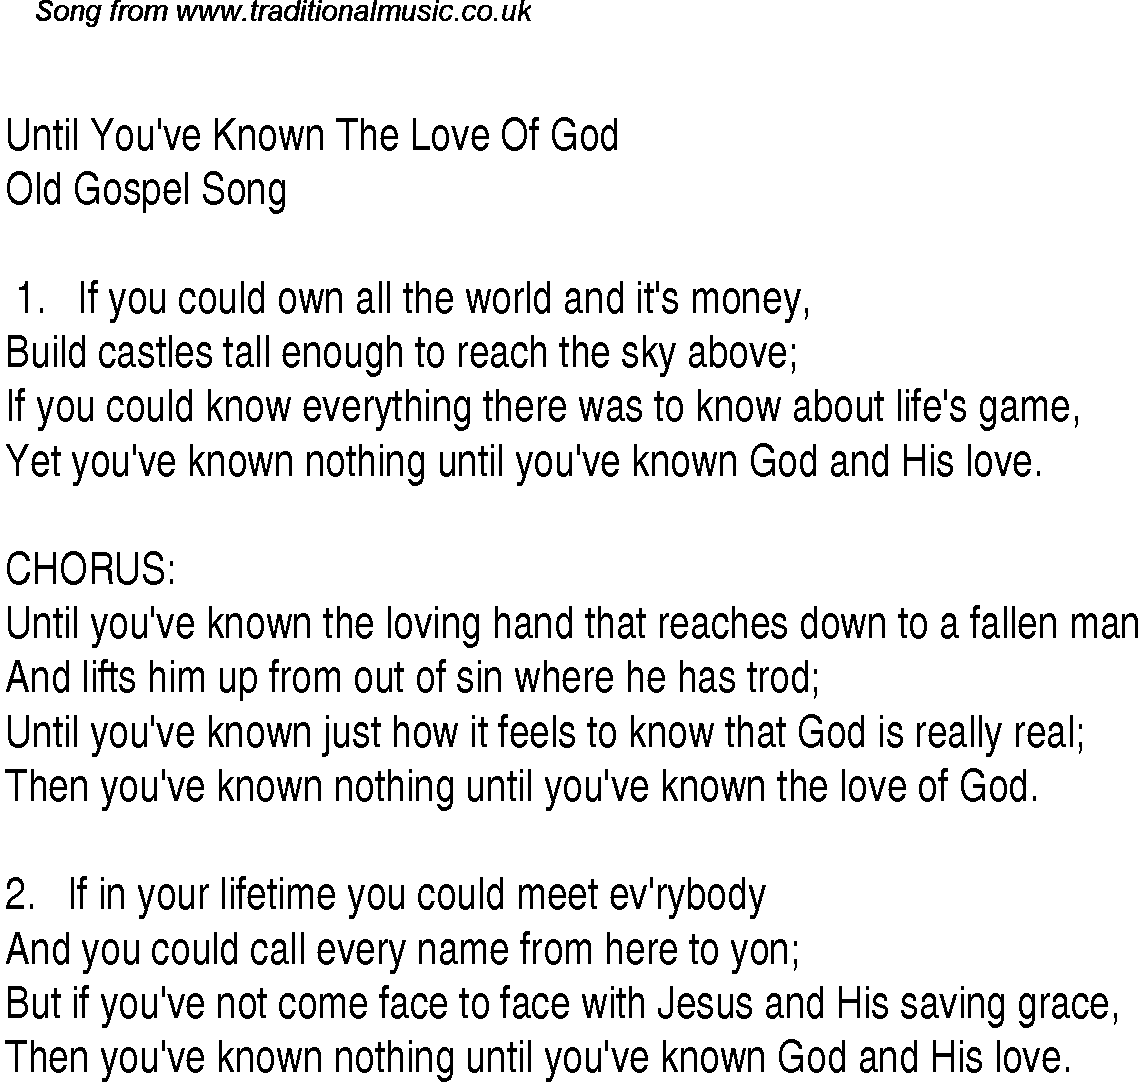 Gospel Song: until-you've-known-the-love-of-god, lyrics and chords.